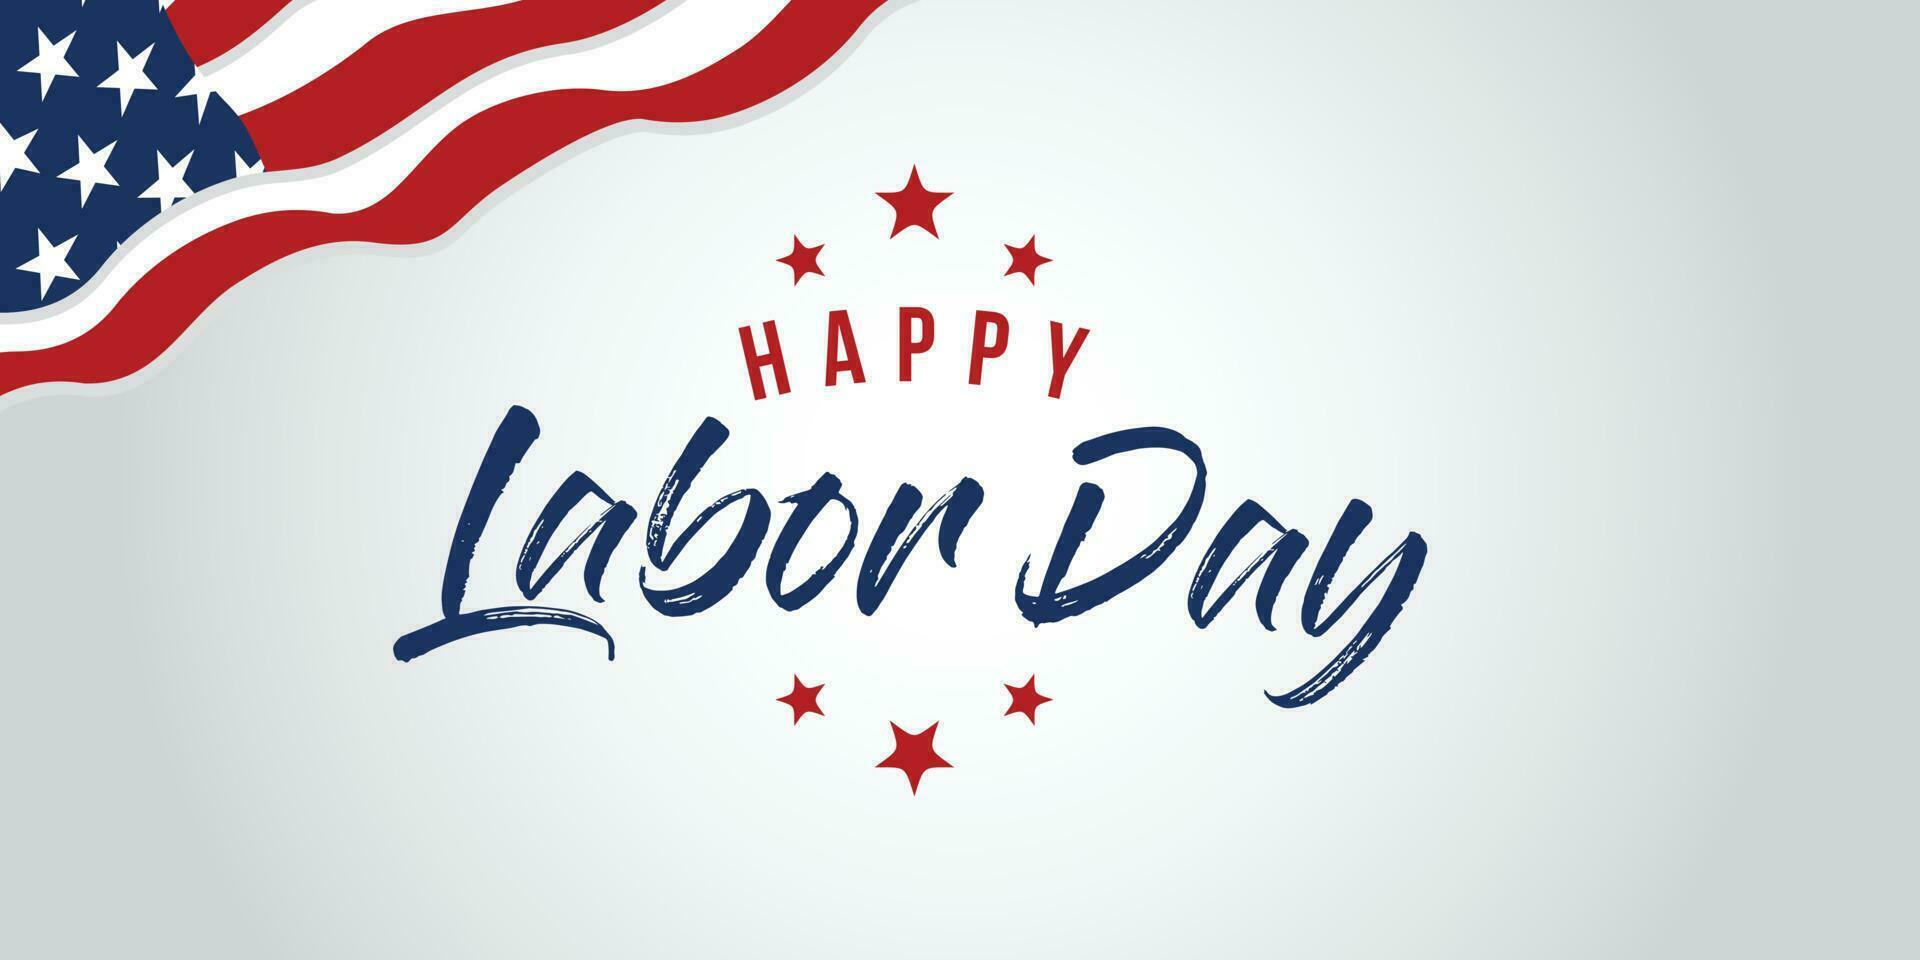 Labor Day greeting card with brush stroke background in United States national flag. Premium Vector